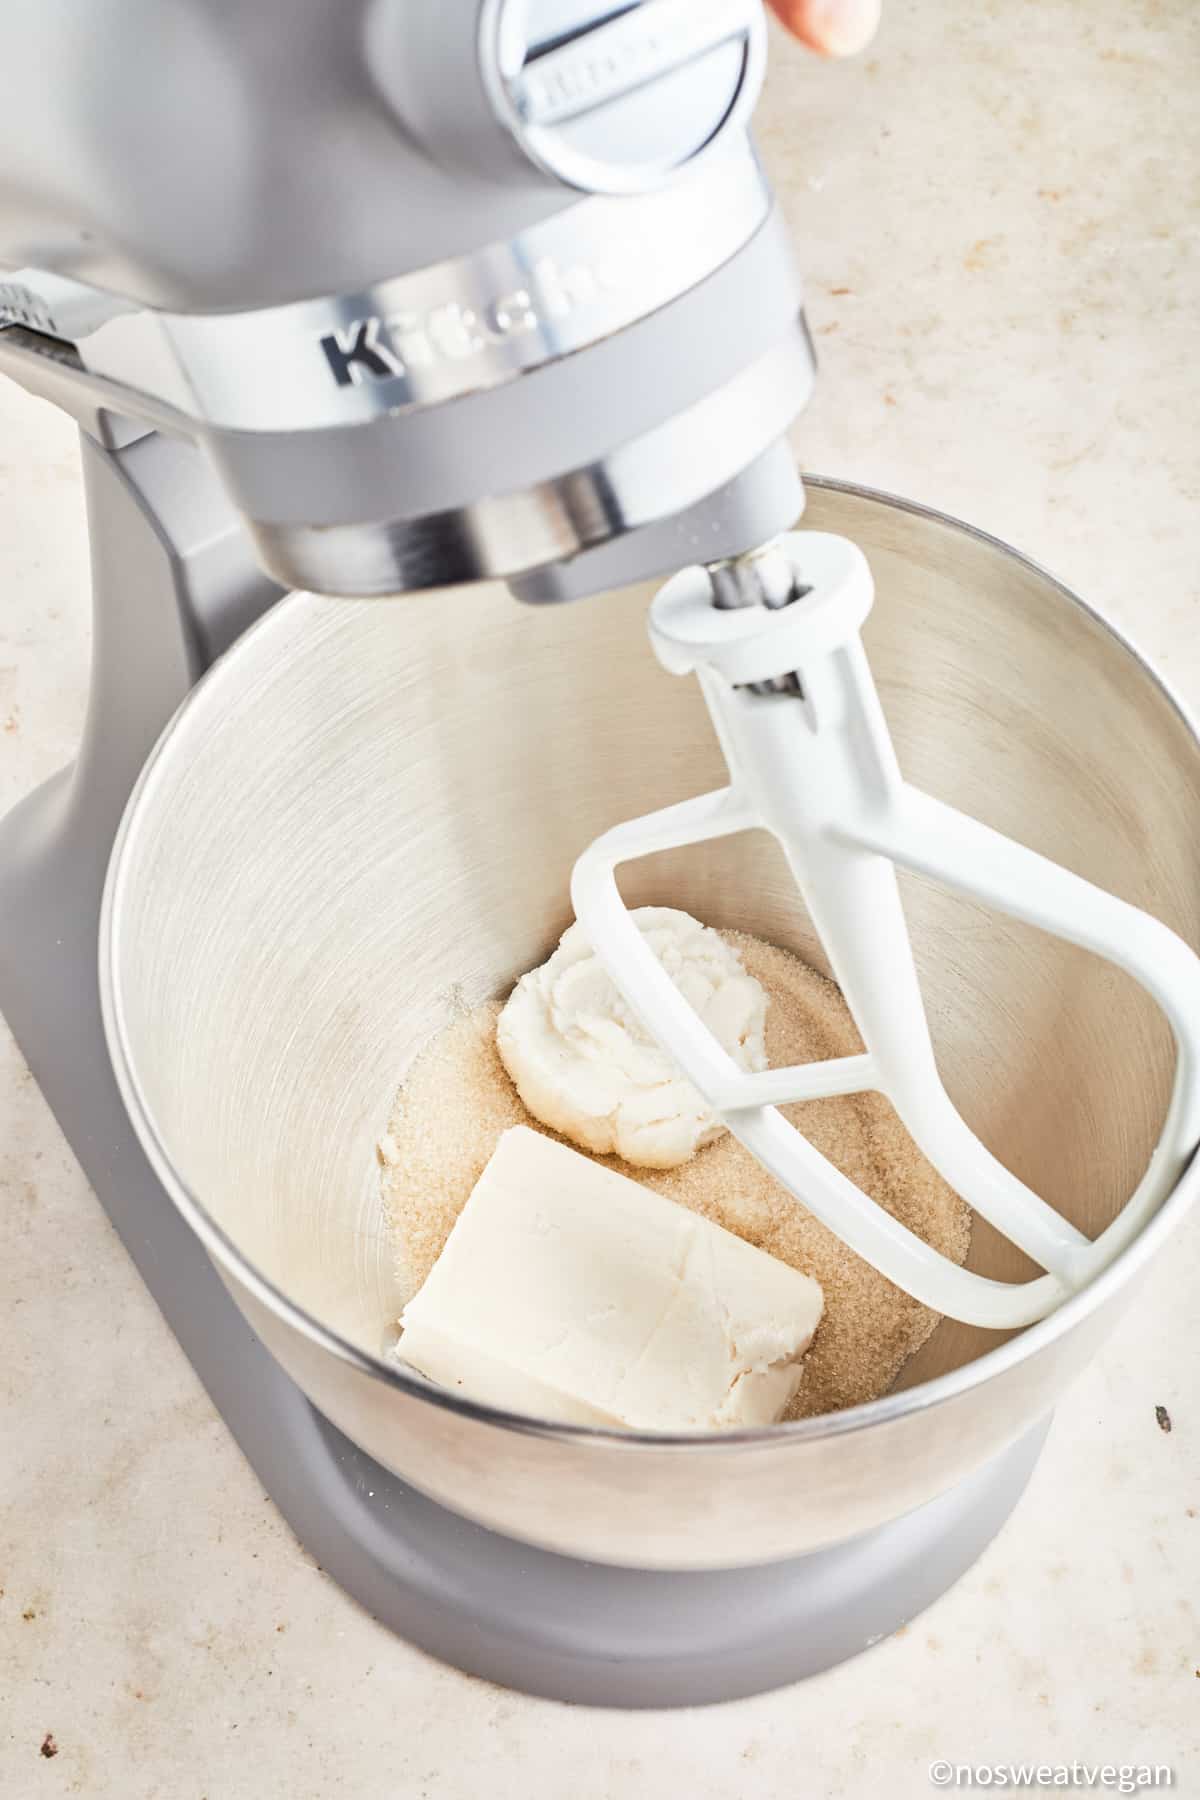 Creaming vegan butter, cream cheese, and sugar in a mixer.